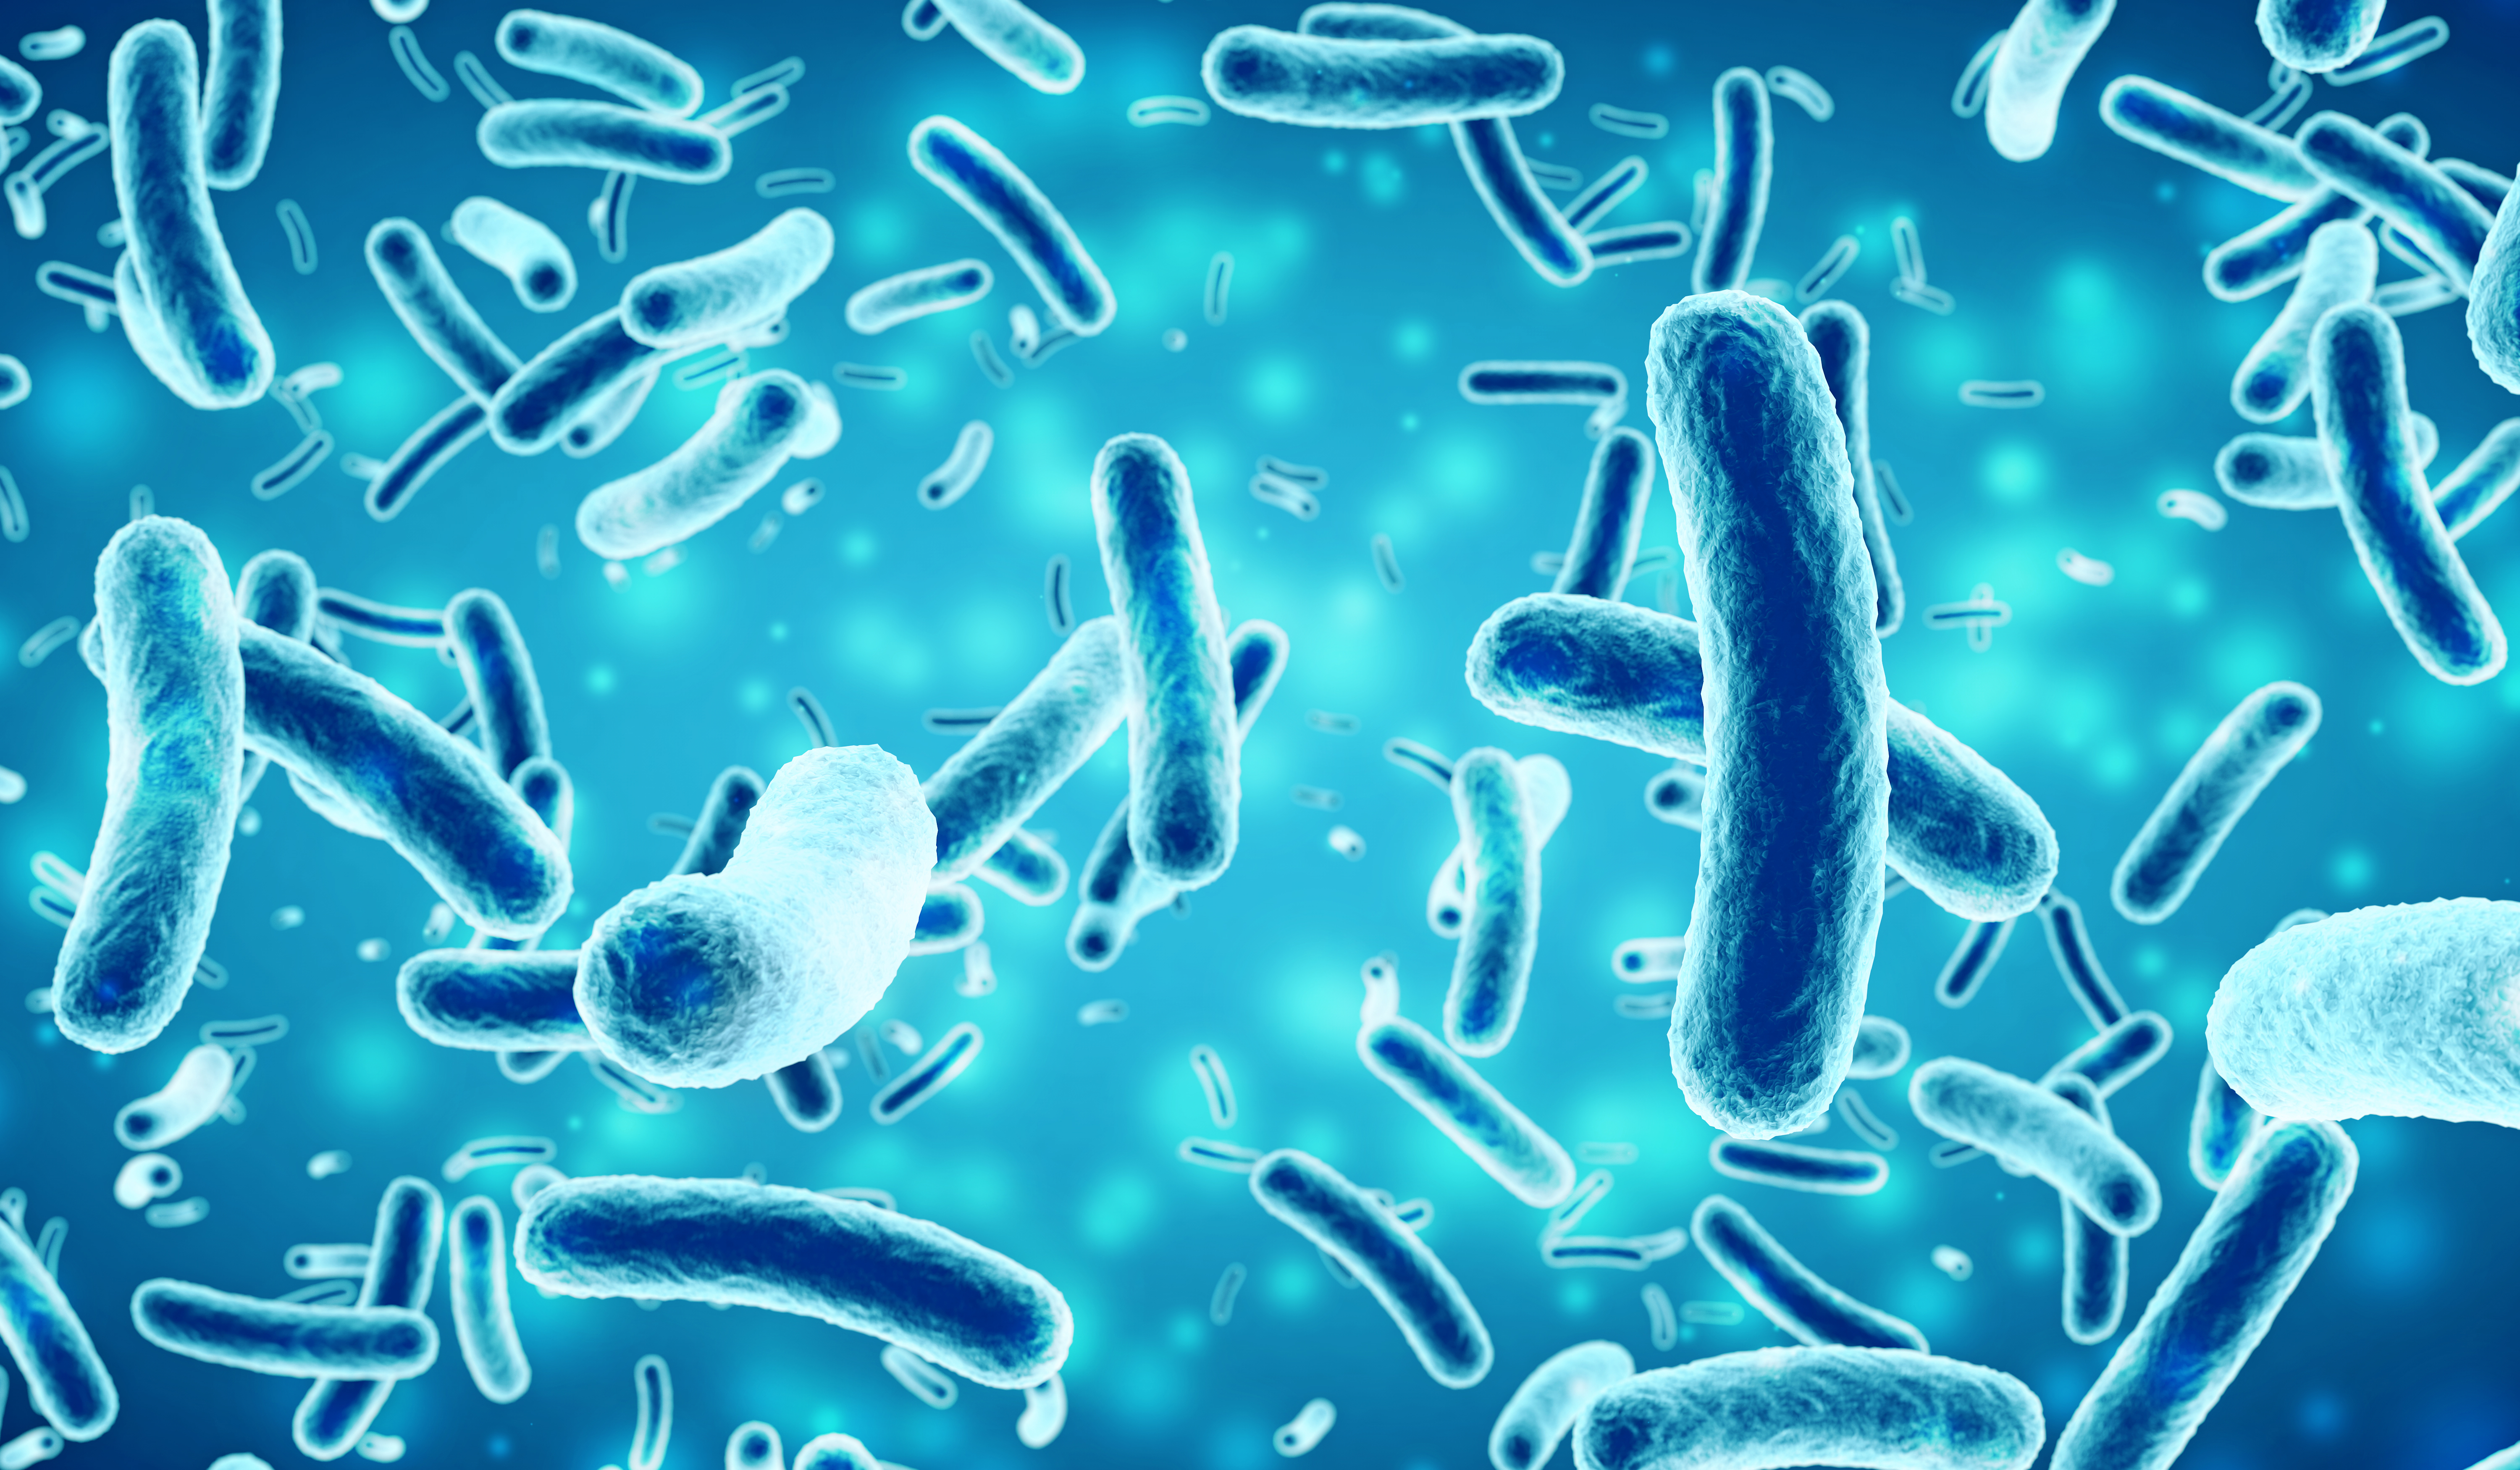 Artistic rendering of bacteria with blue background